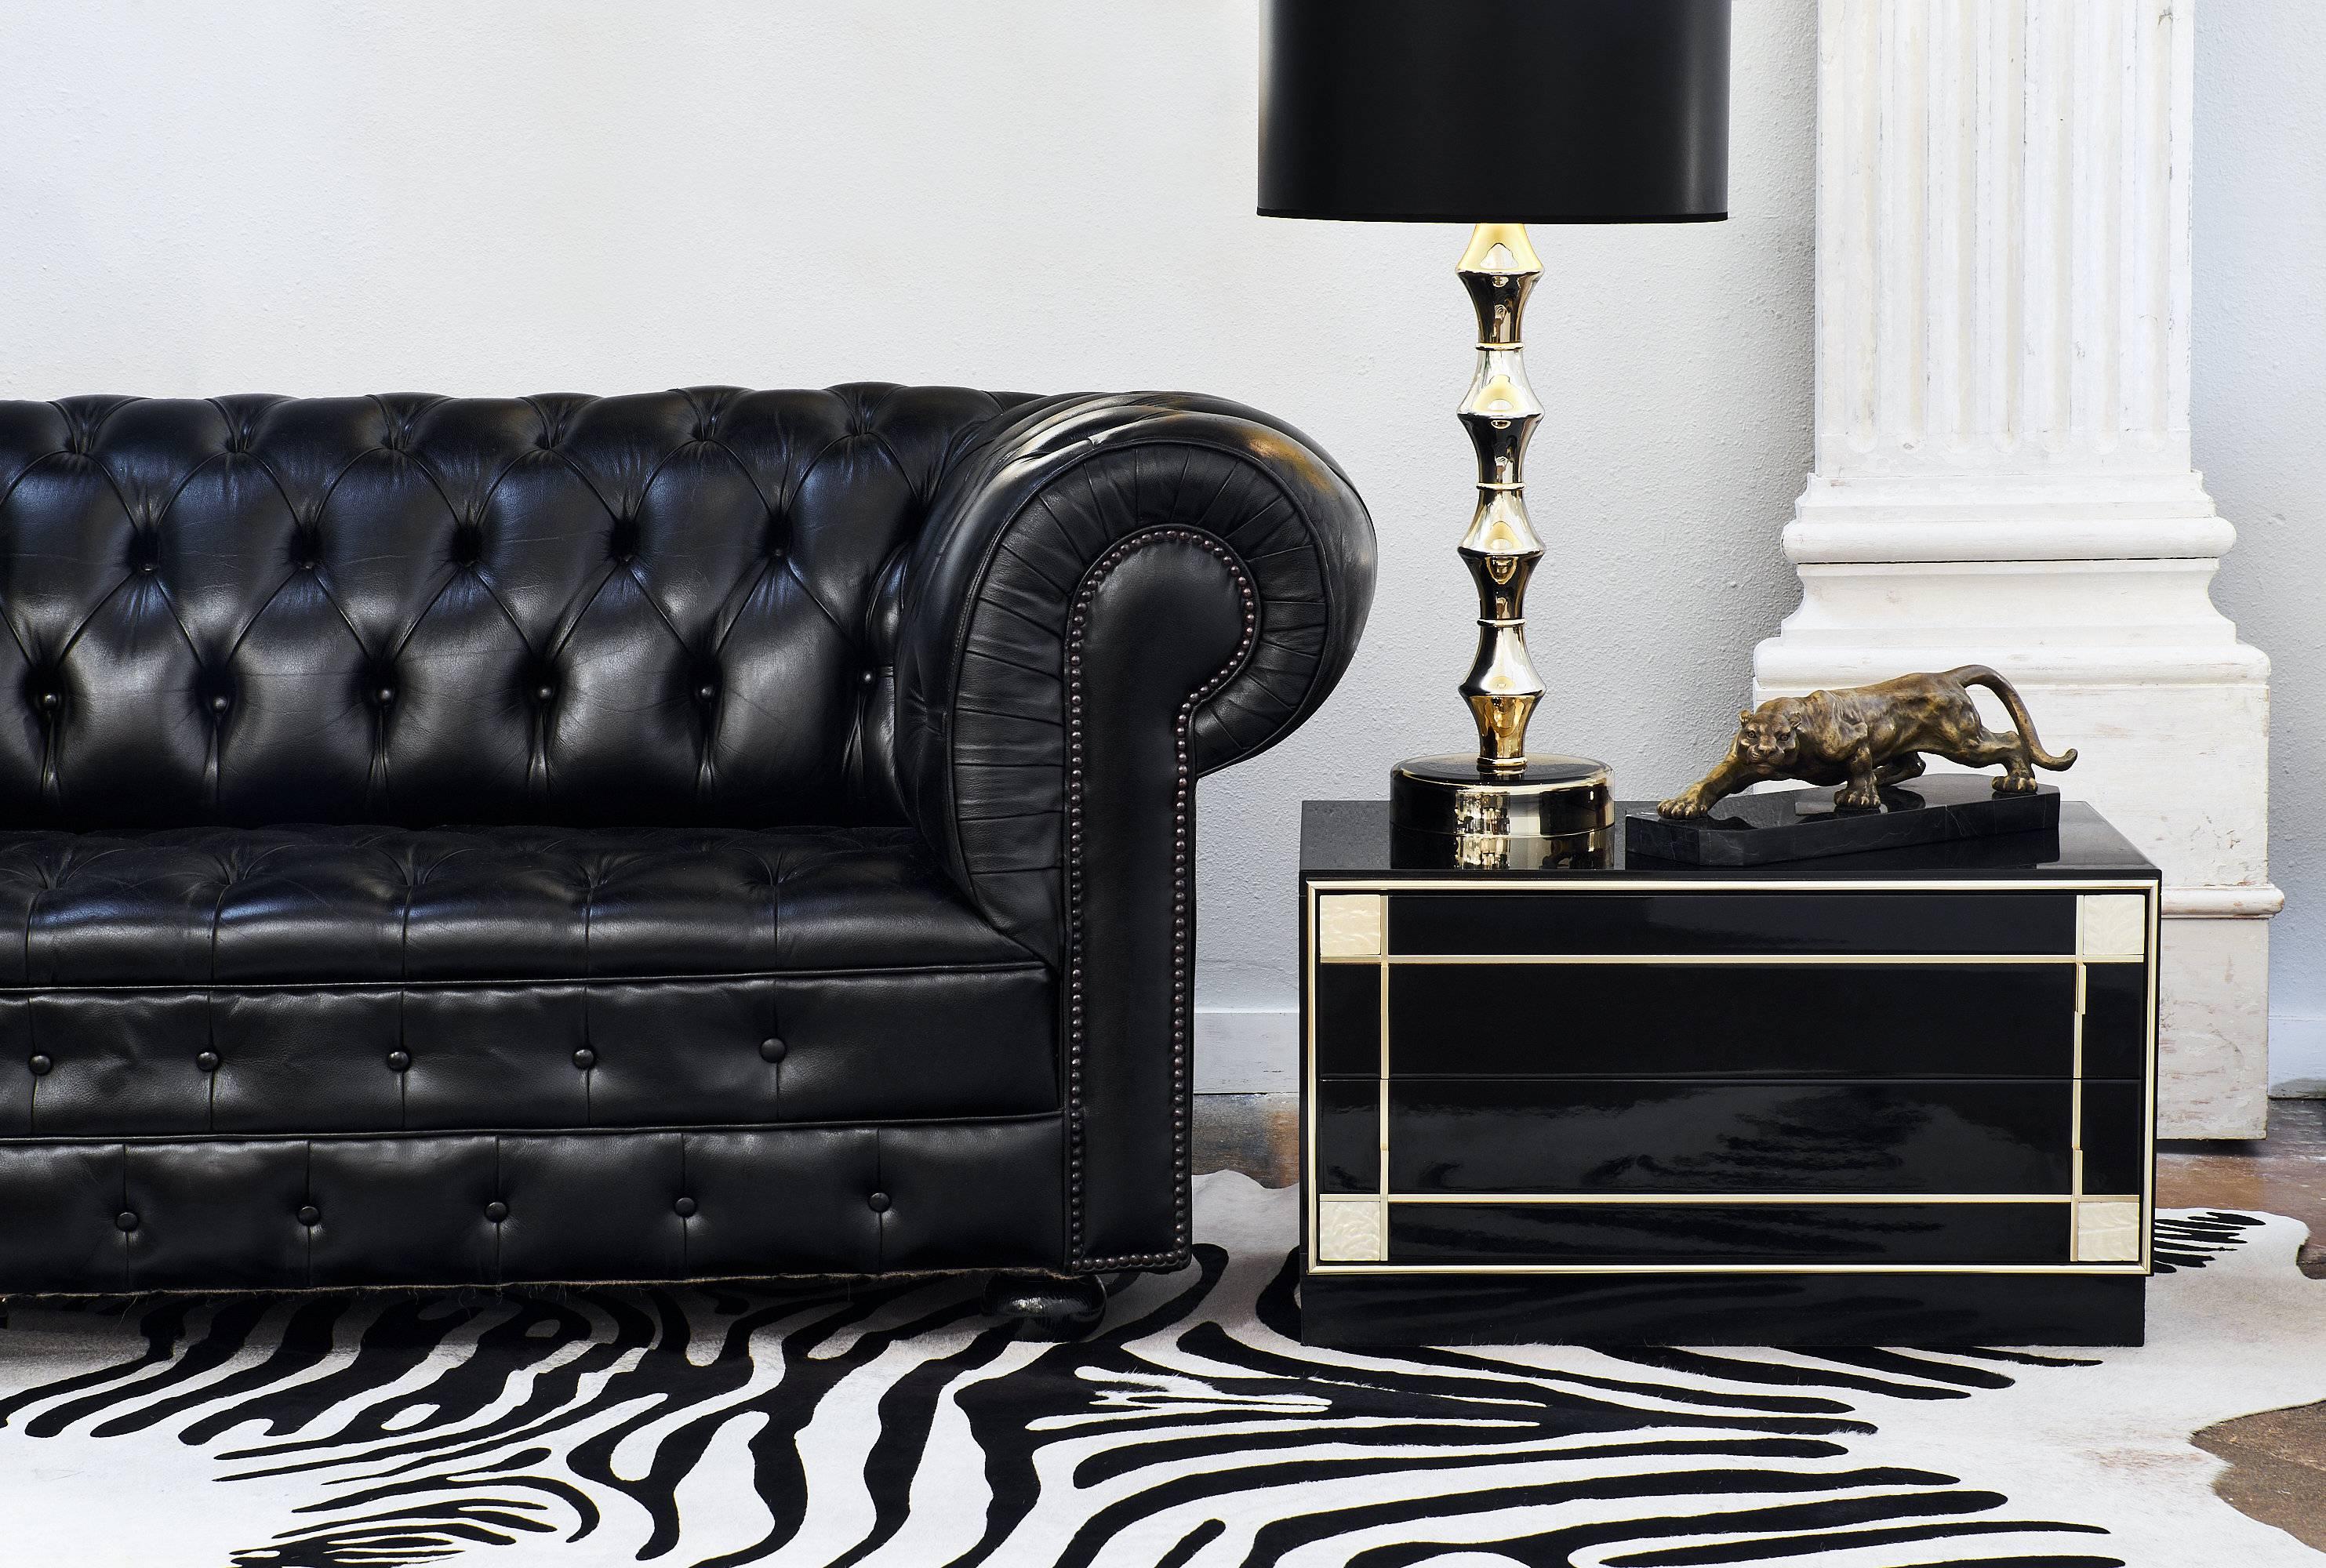 Tufted black full grain leather Chesterfield sofa in superb condition from England. This comfortable and amazing piece has been professionally reconditioned and will be eye-catching in your living space!